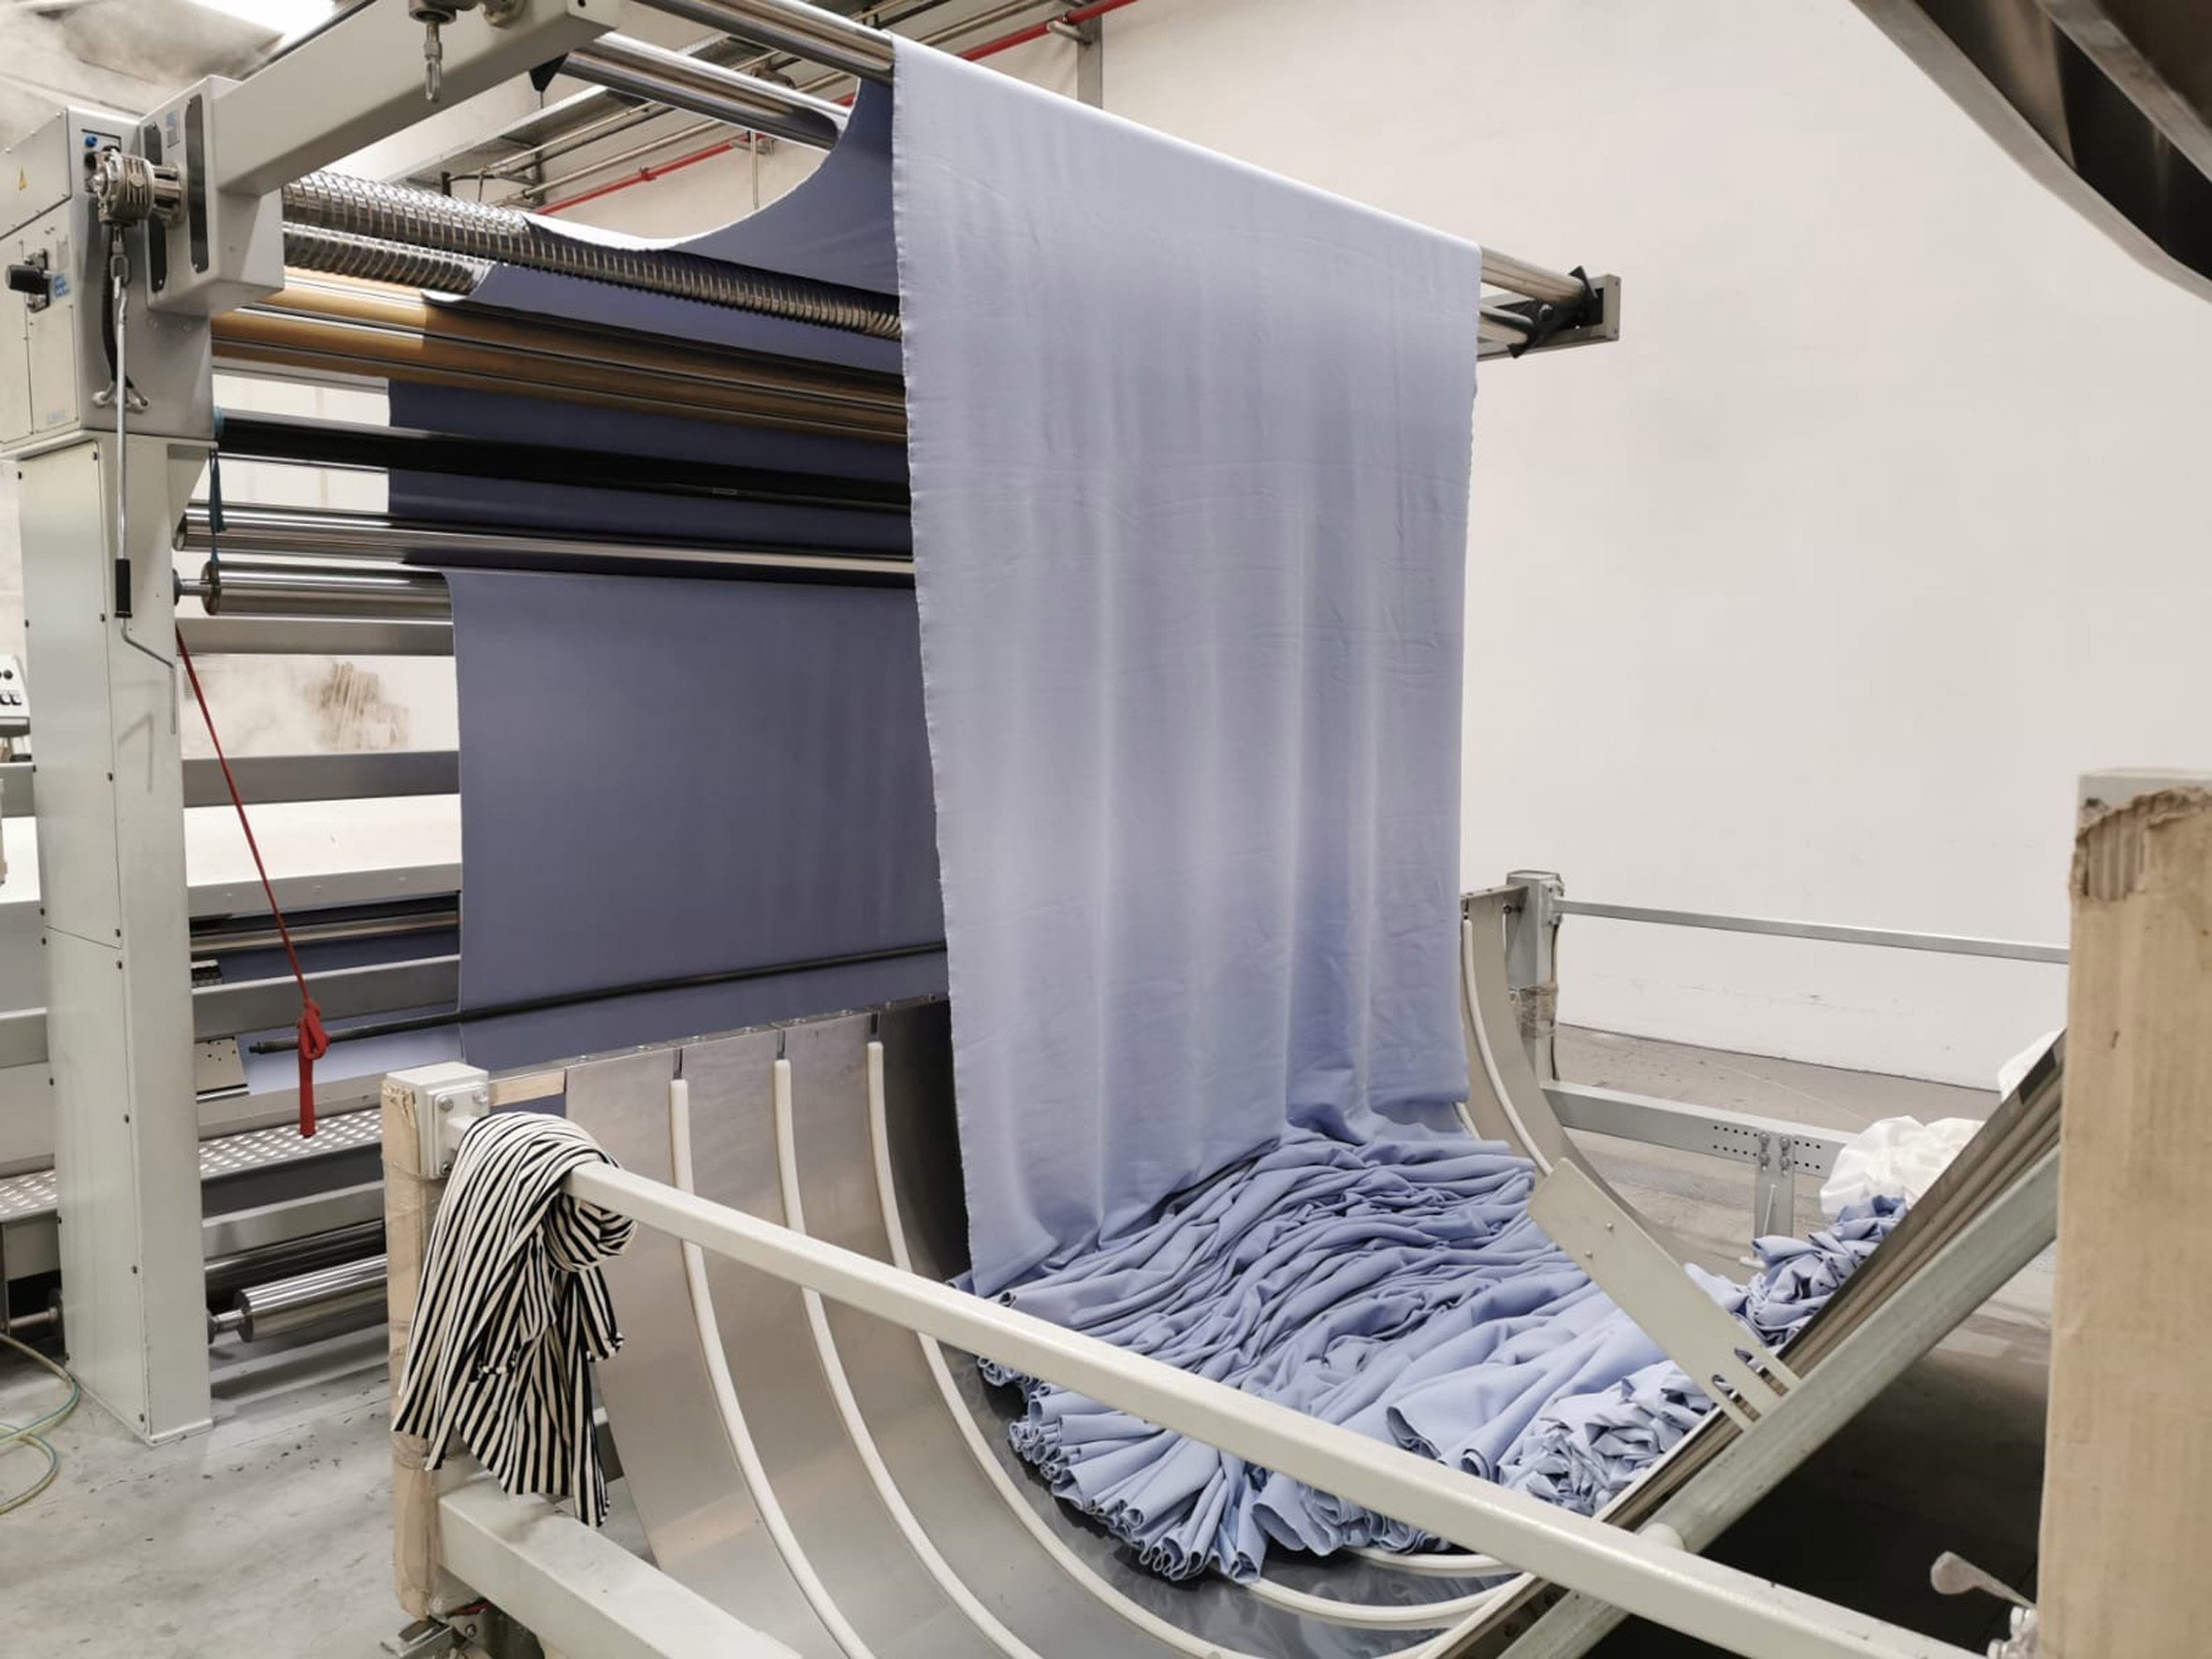 Photo of a pale blue fabric being pulled through industrial machines